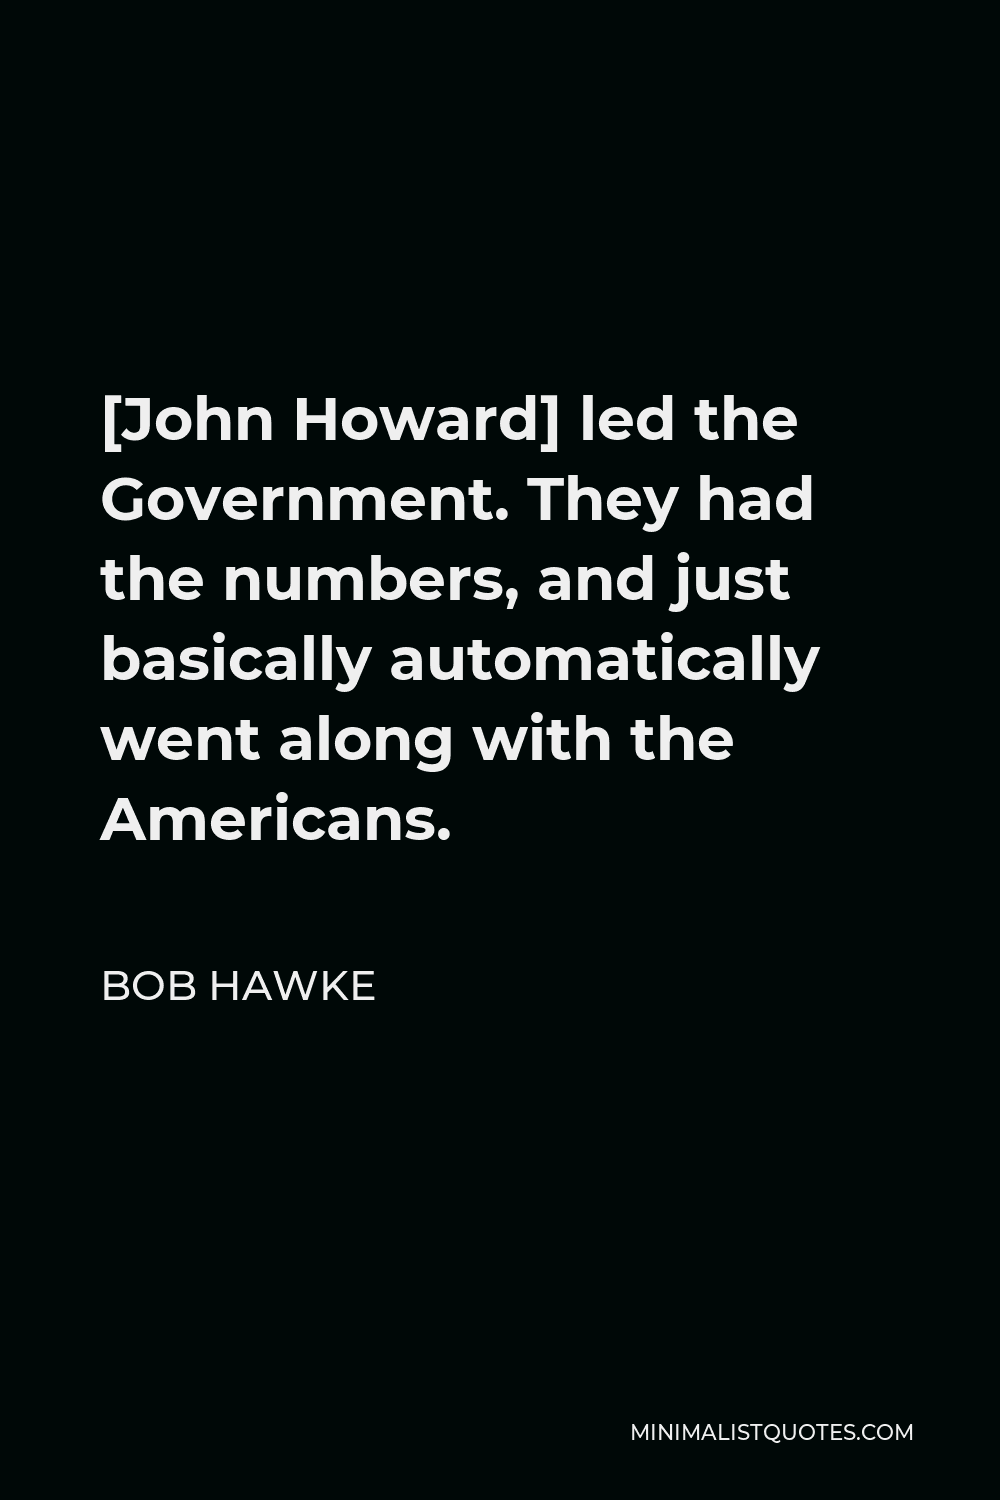 Bob Hawke Quote - [John Howard] led the Government. They had the numbers, and just basically automatically went along with the Americans.